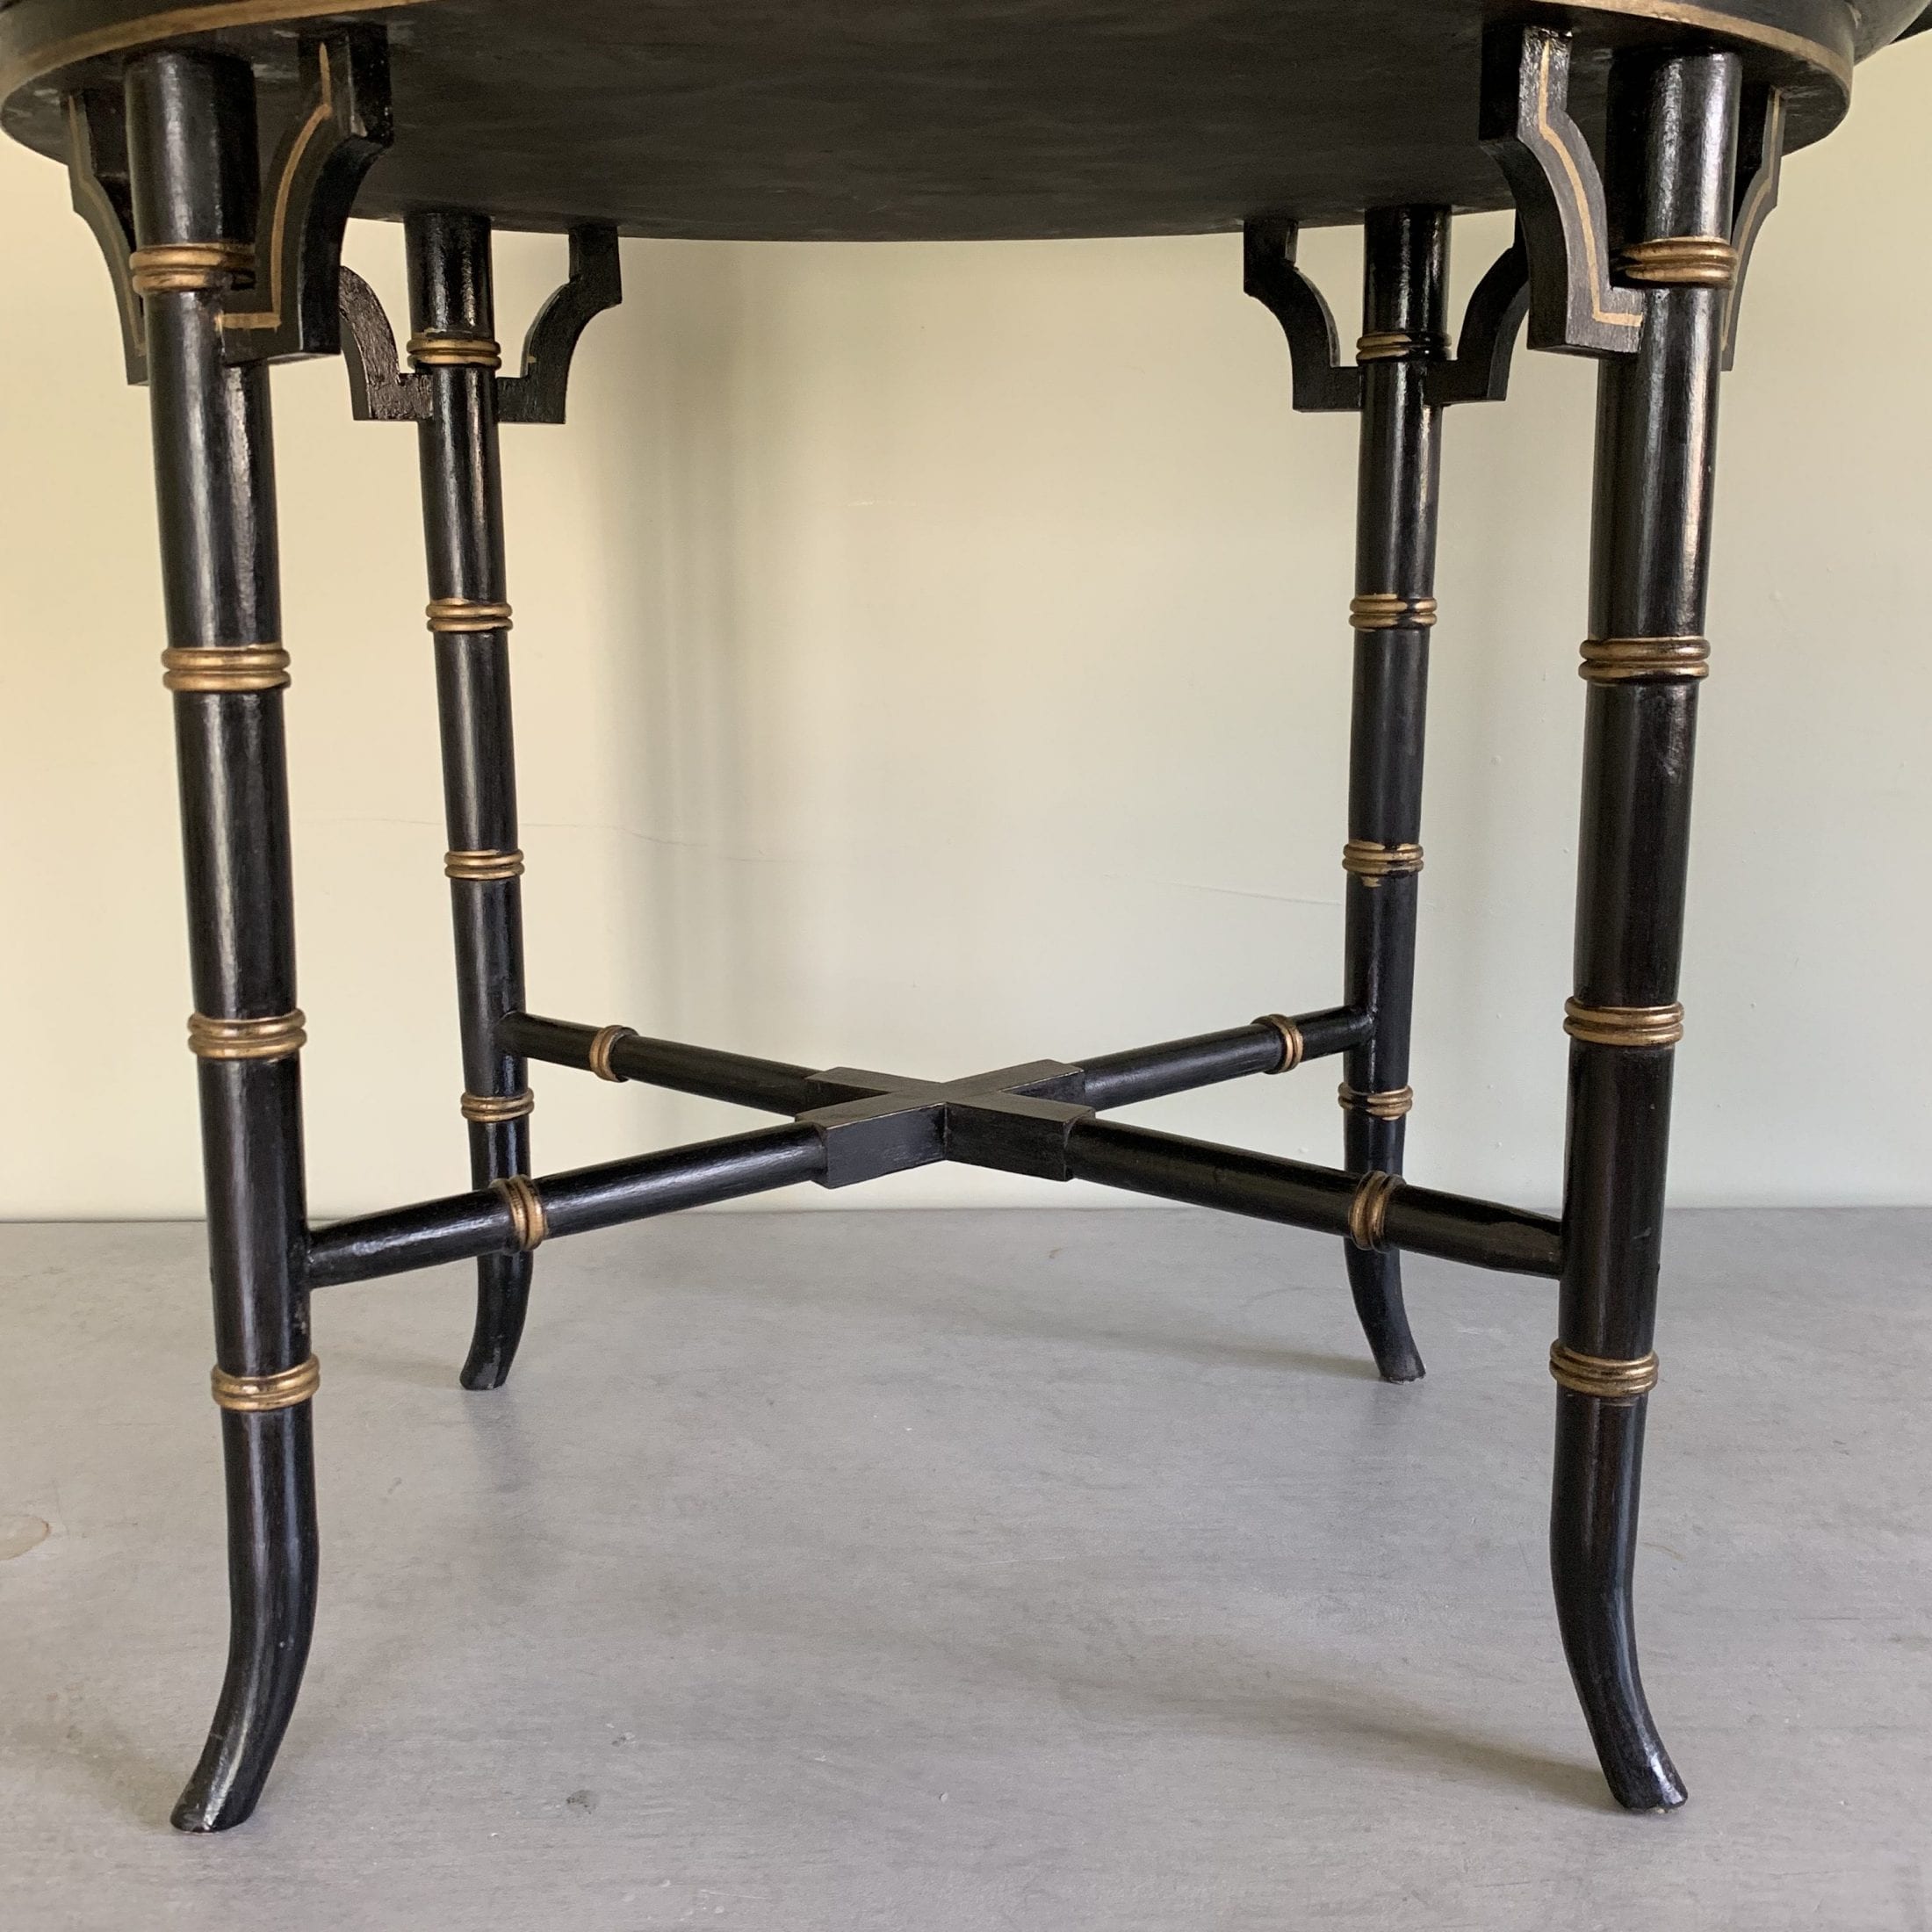 1930s Ebonised Faux Bamboo Side Table – SOLD – The Oscar Collective